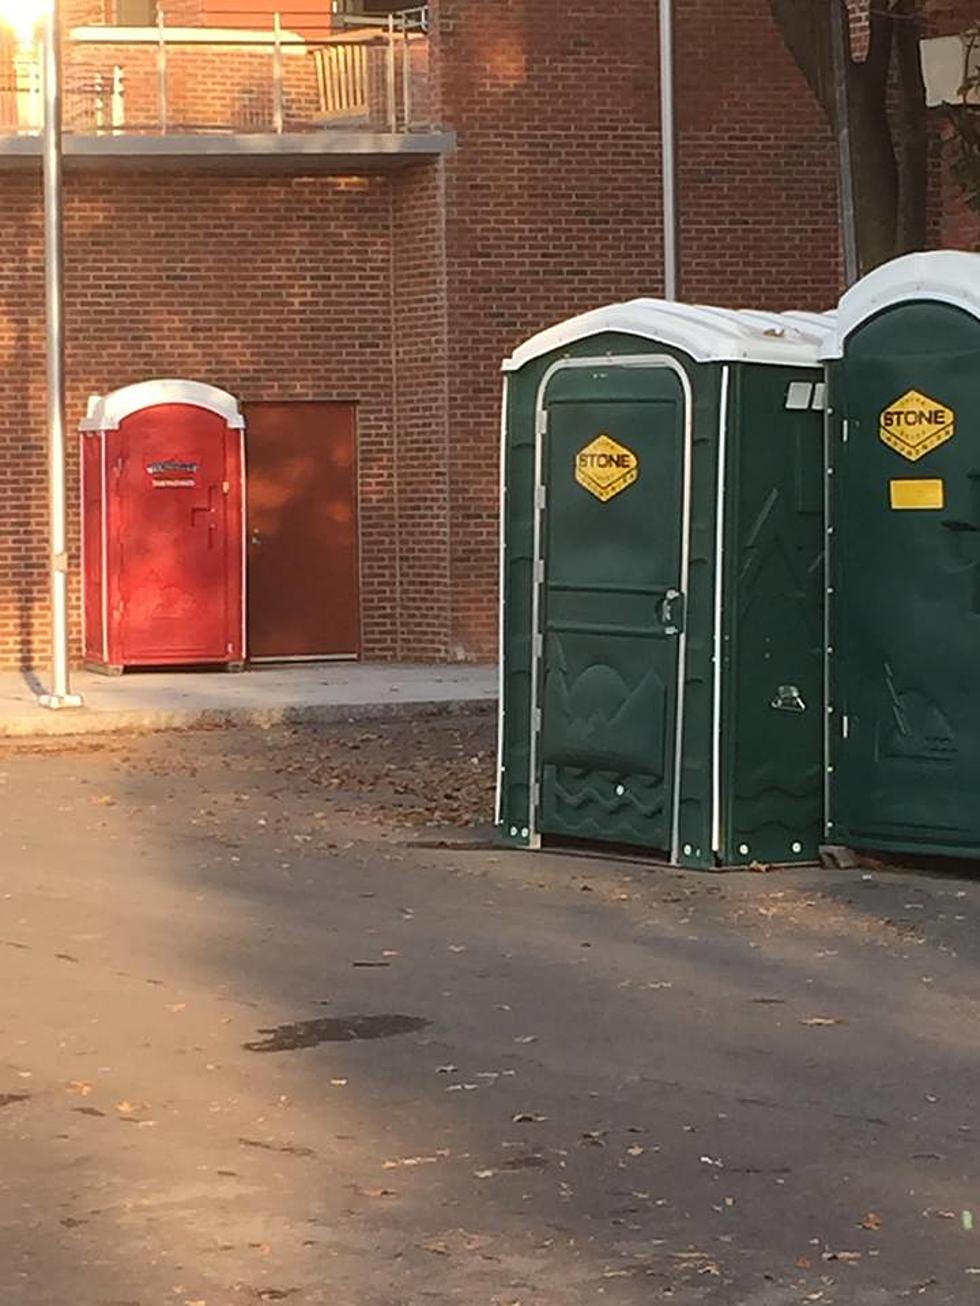 The Porta Potty is your Friend